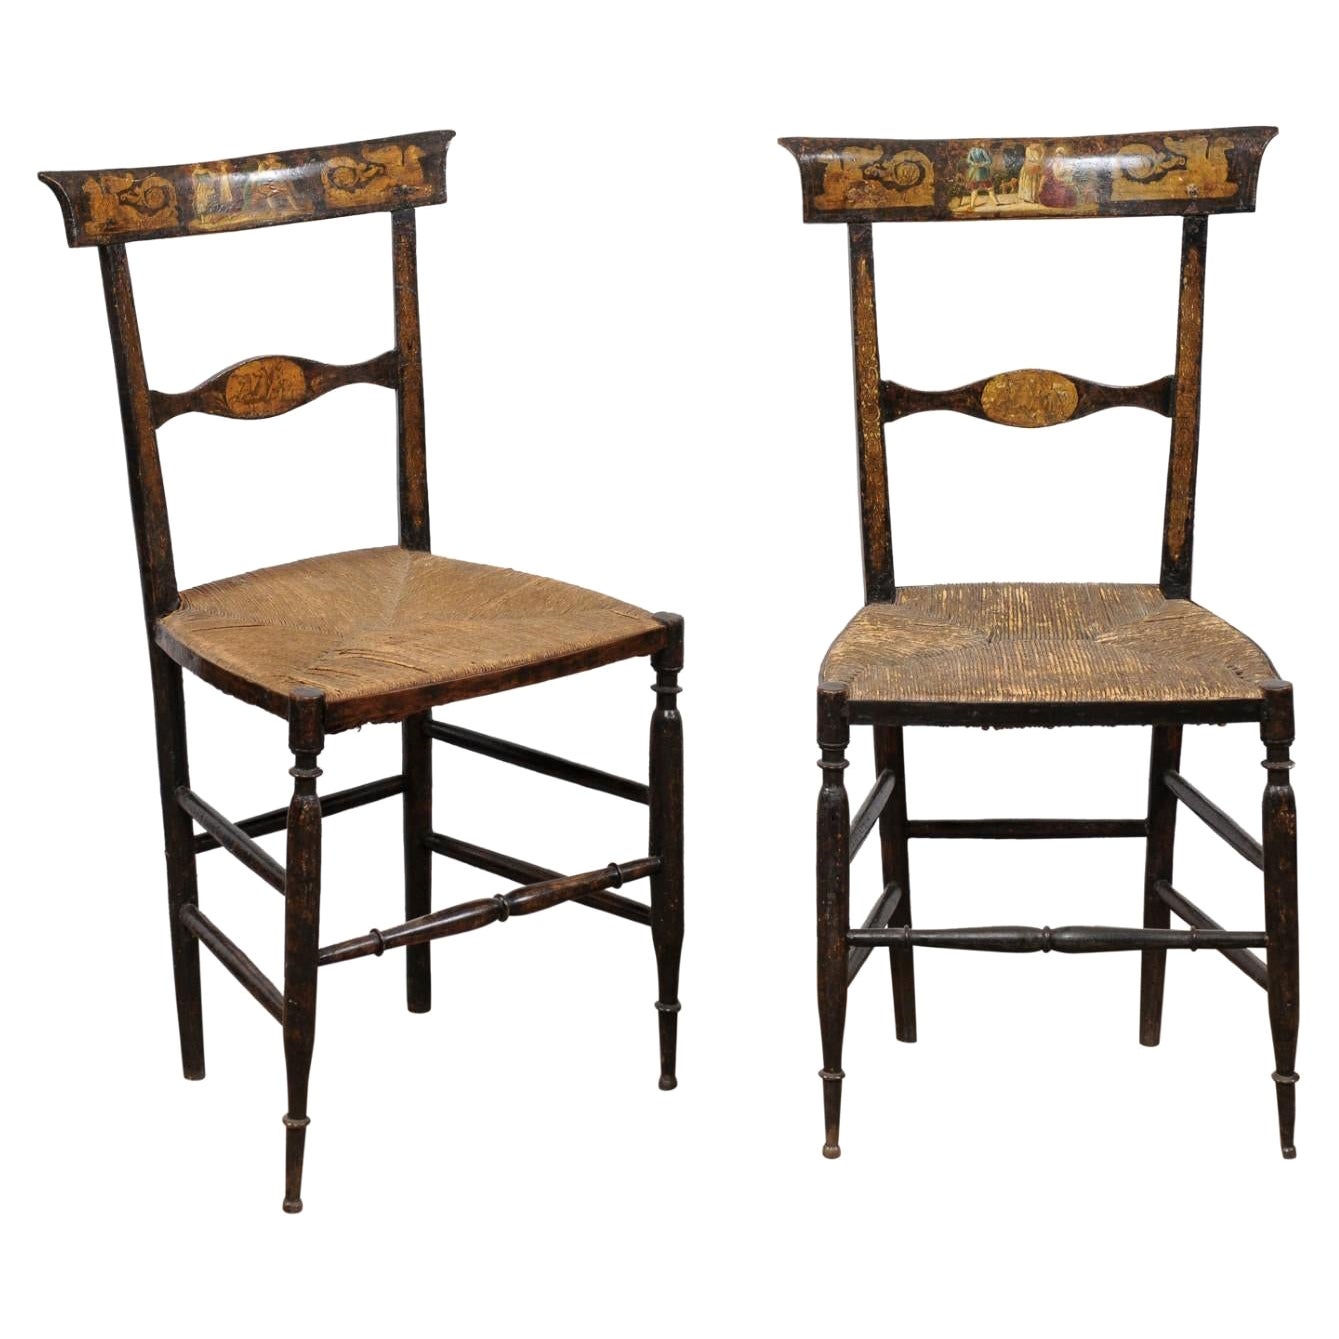 Pair of Handpainted Side Chairs with Rush Seats, Italy, circa 1820 For Sale